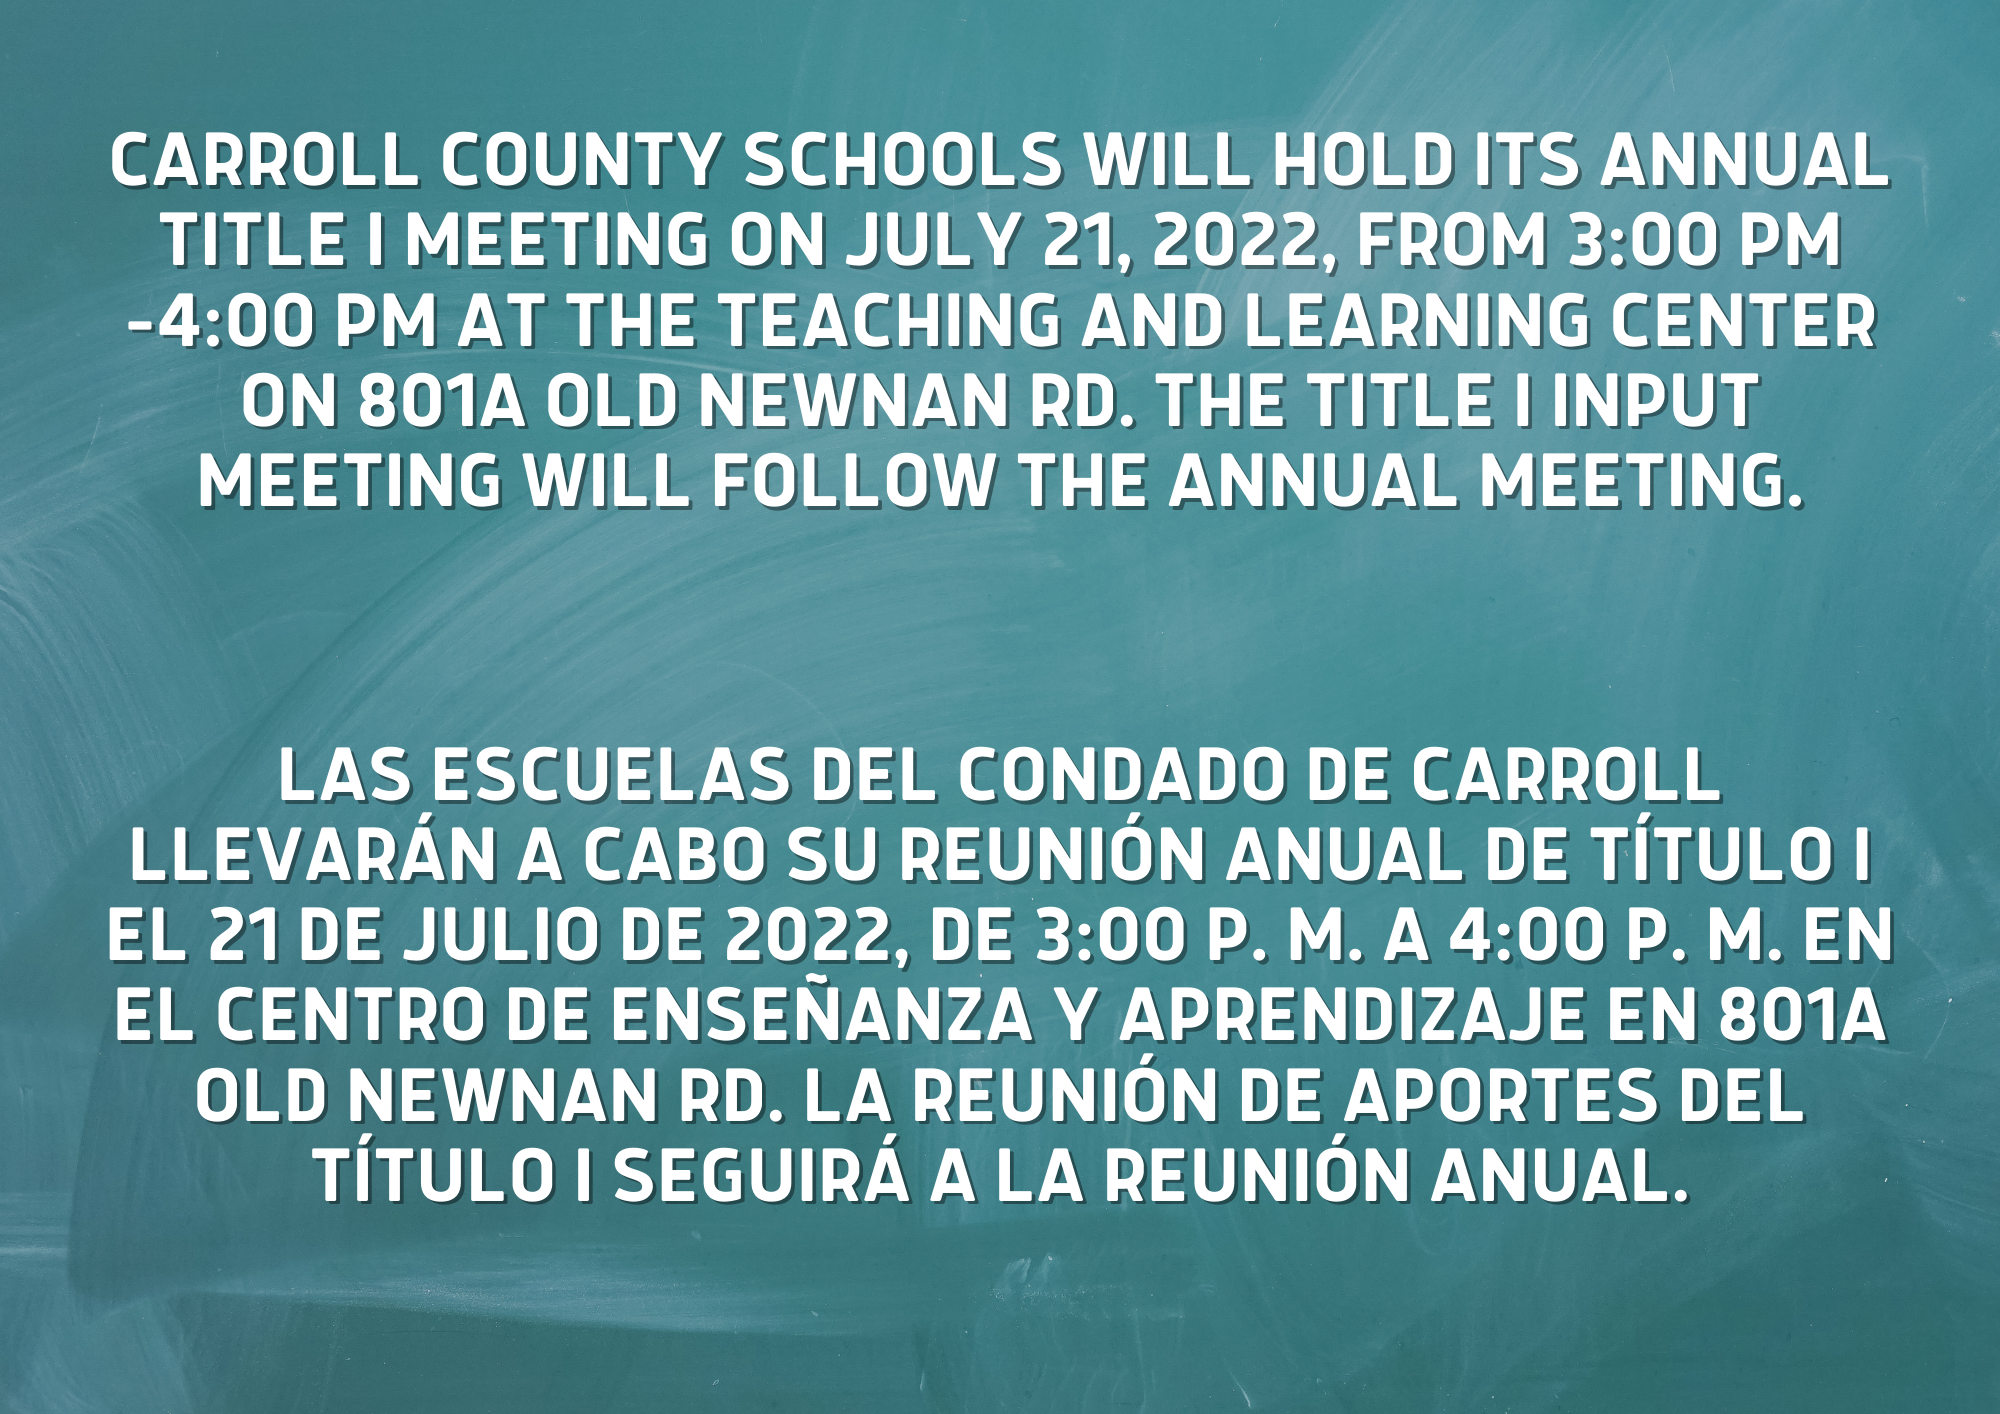 title 1 meeting on July 21st